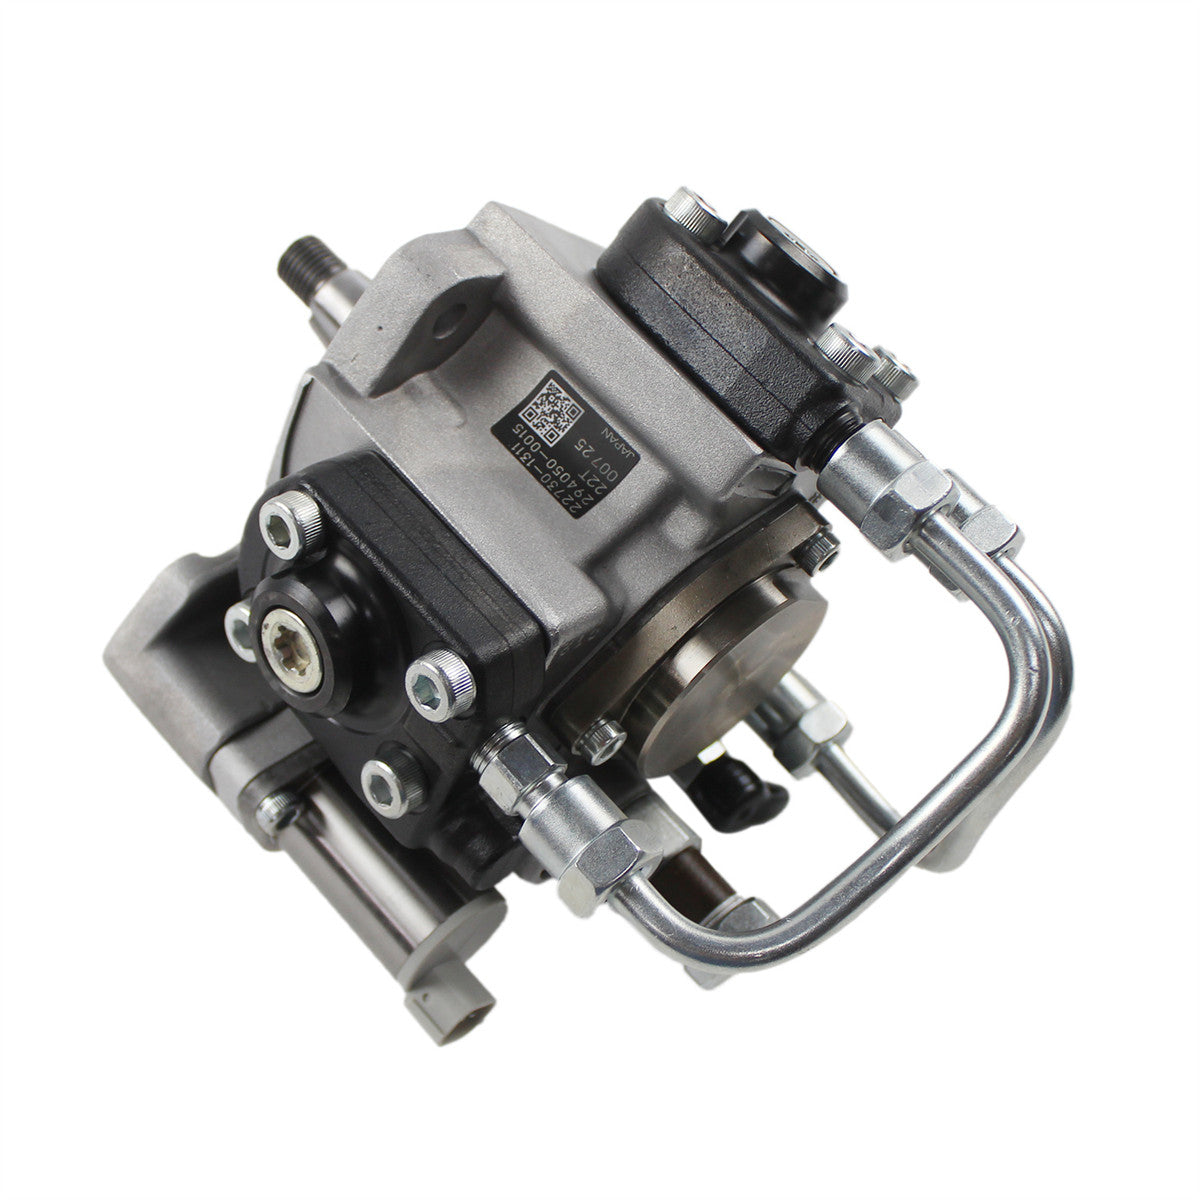 294050-0015 22730-1311 294050-0014 Fuel Injection Pump for Denso Hino J08E Truck - Sinocmp